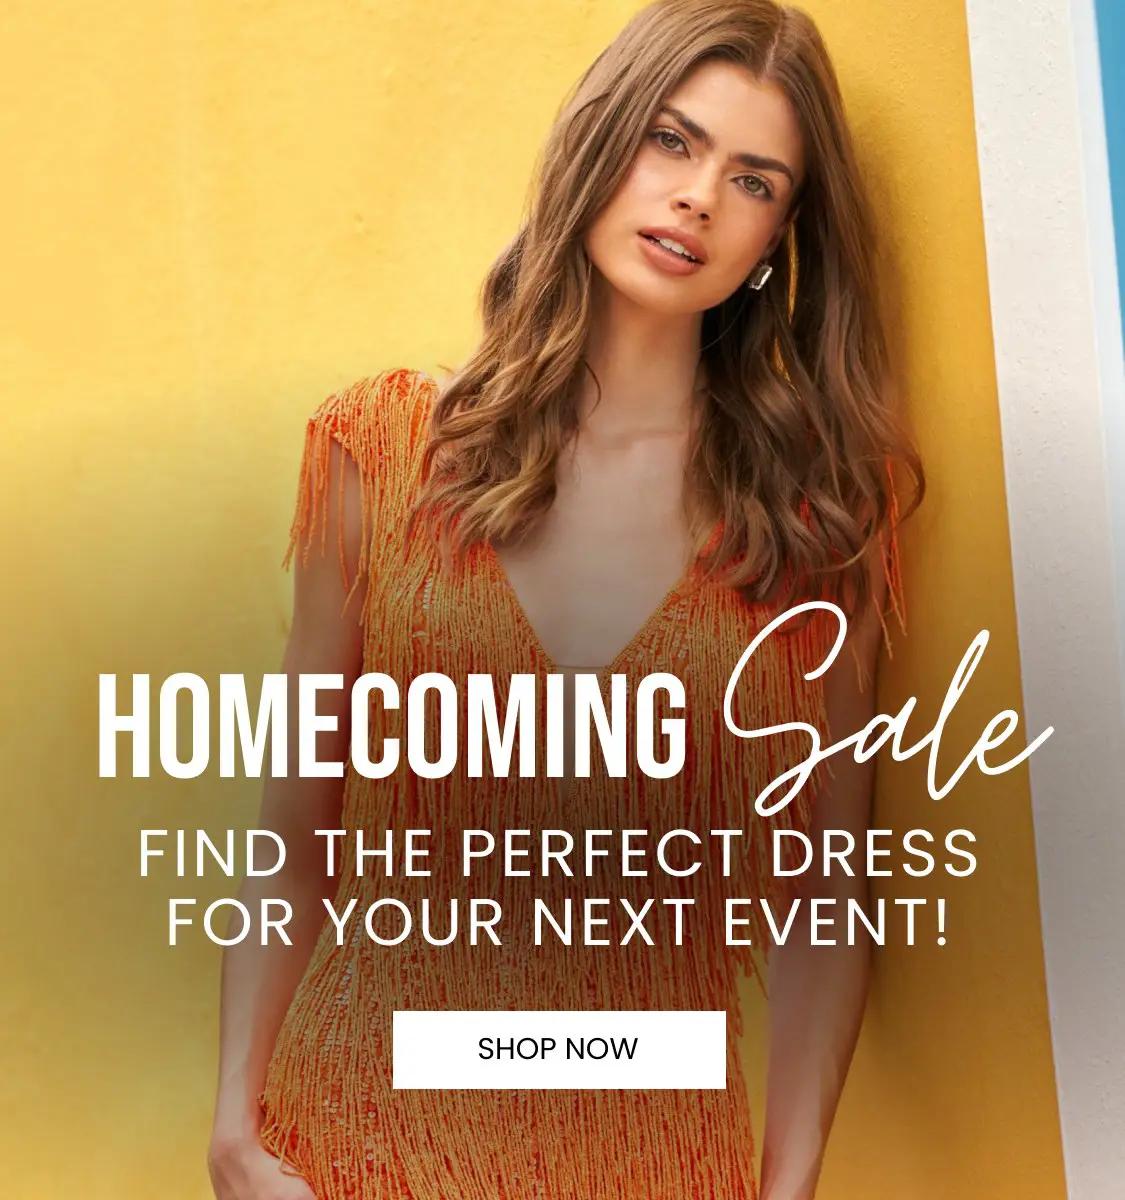 Homecoming Sale Dresses at TBC Occasions